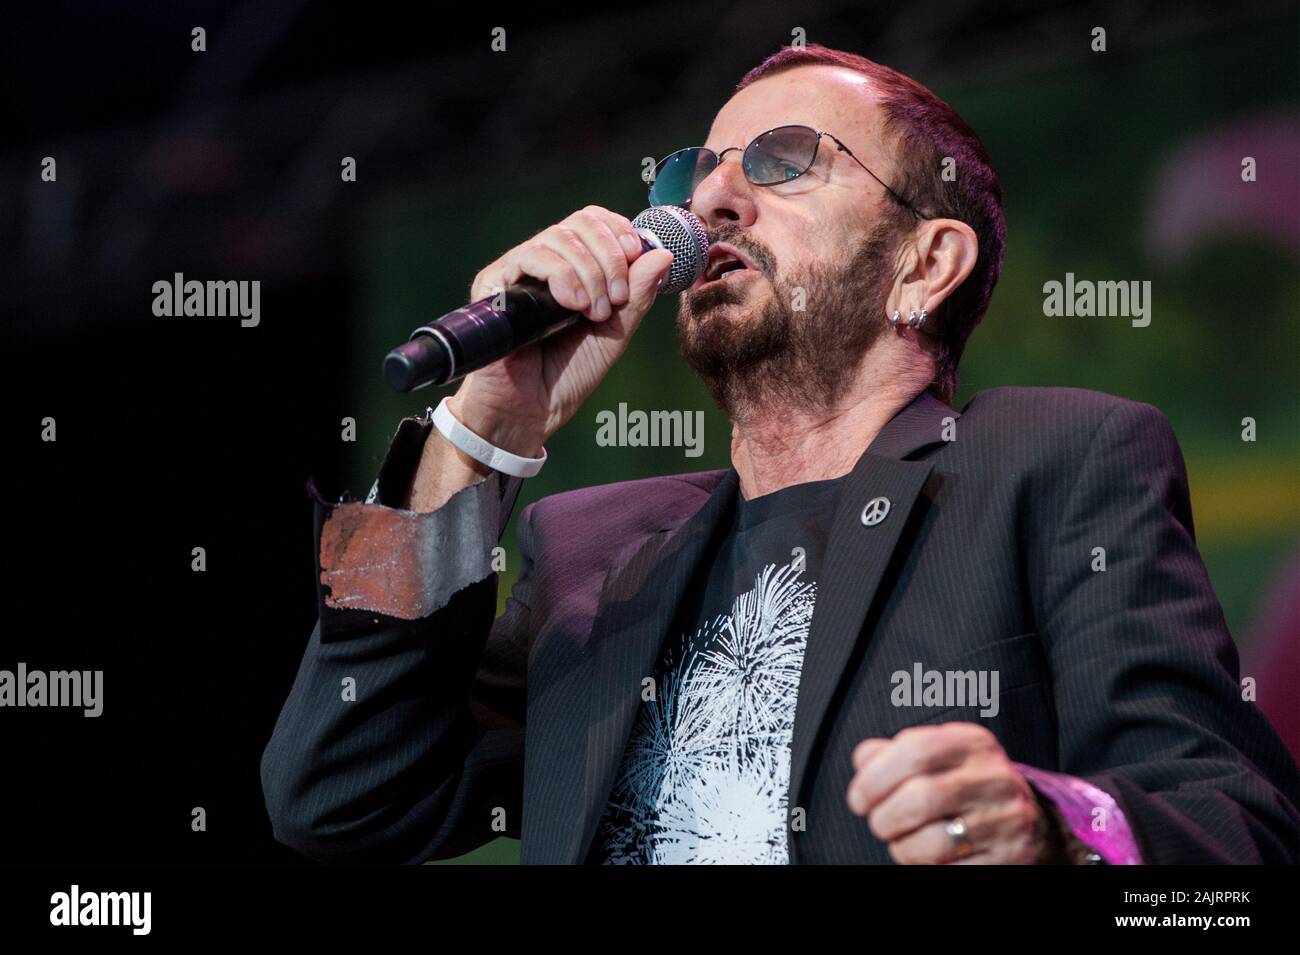 Milan Italy , 03 July 2011 ,Live concert of Ringo Starr at the Arena Civica : Ringo Starr during the concert Stock Photo